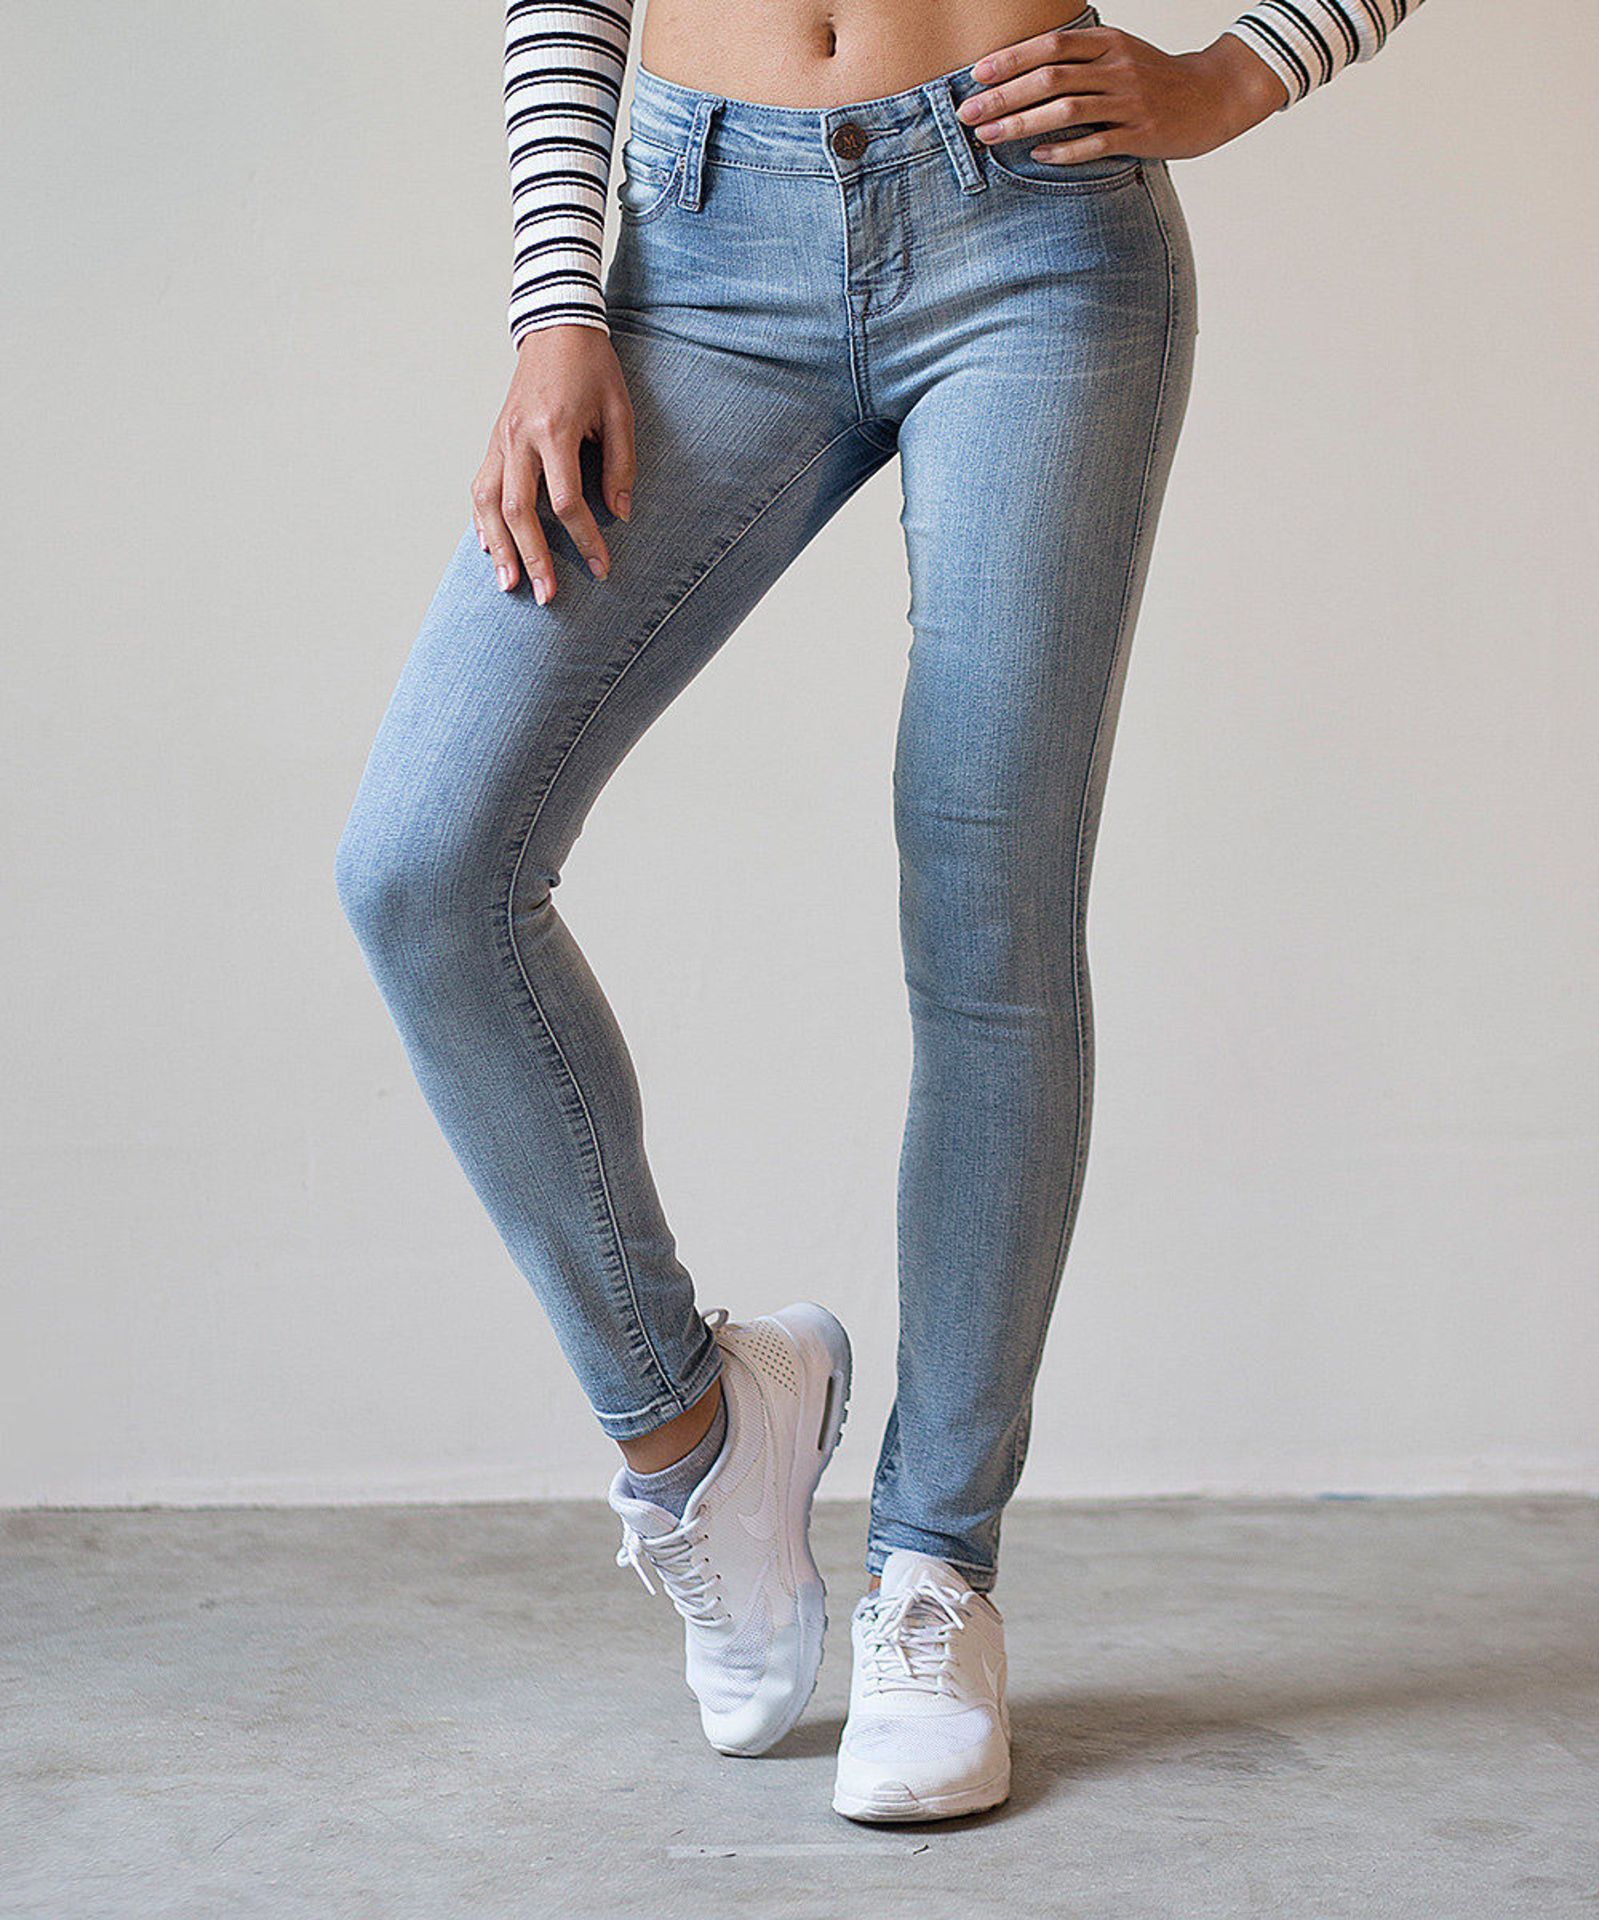 MIA & MOSS, Light Blue Sabine Skinny Jeans, 30" (New with tags) [Ref: 47164611- T-56] - Image 3 of 3